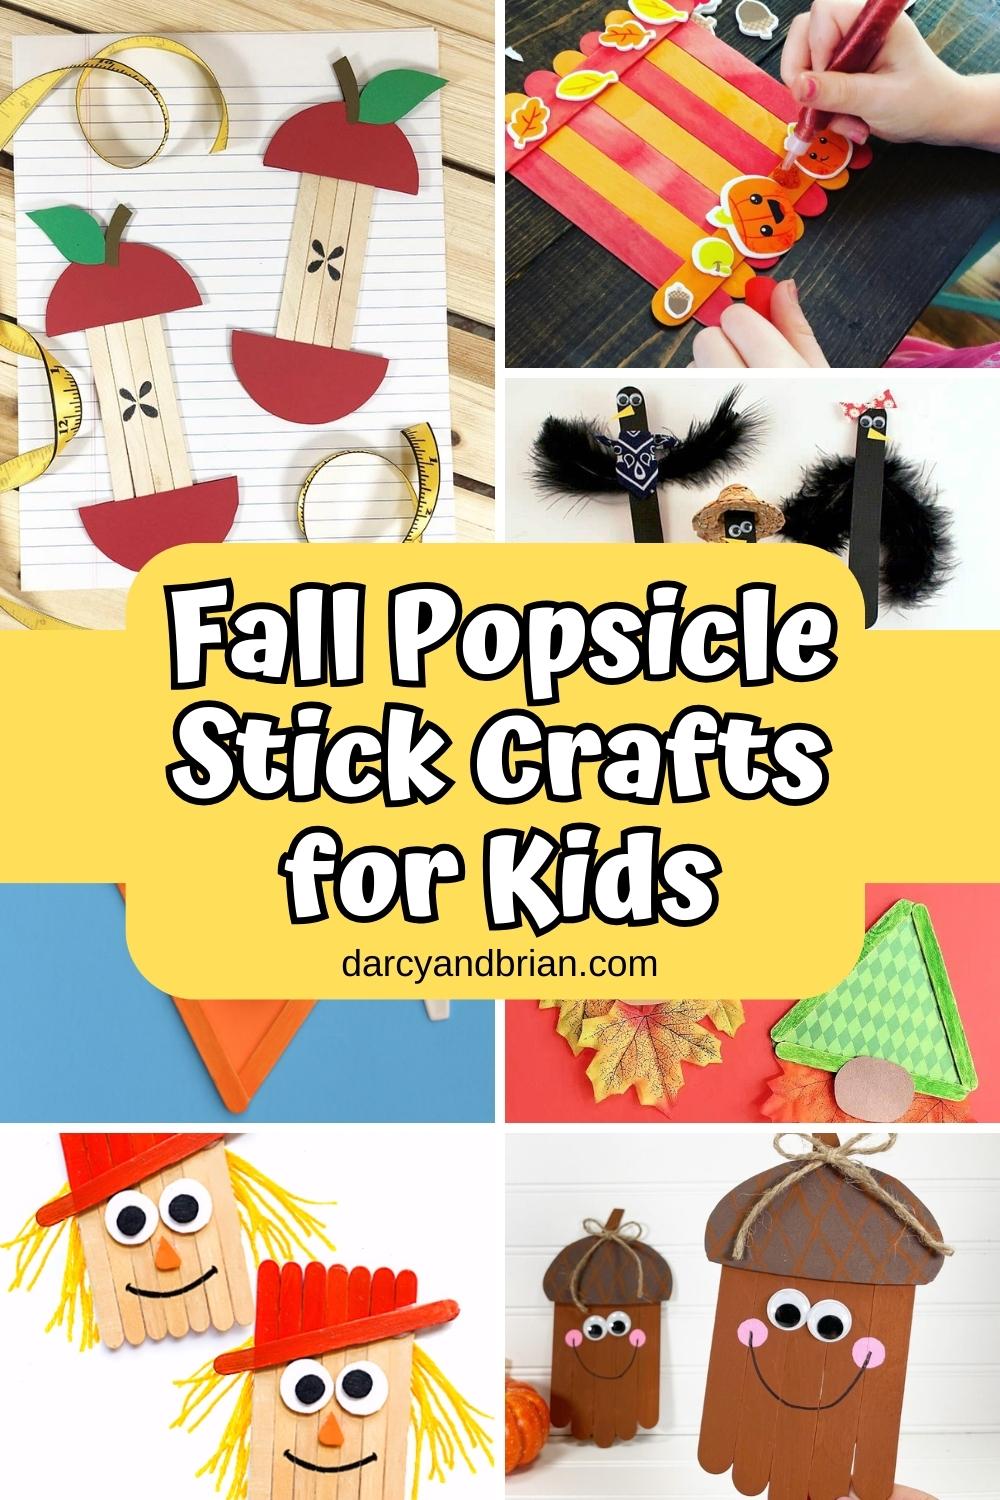 Fun Crafts for Kids and Family Projects